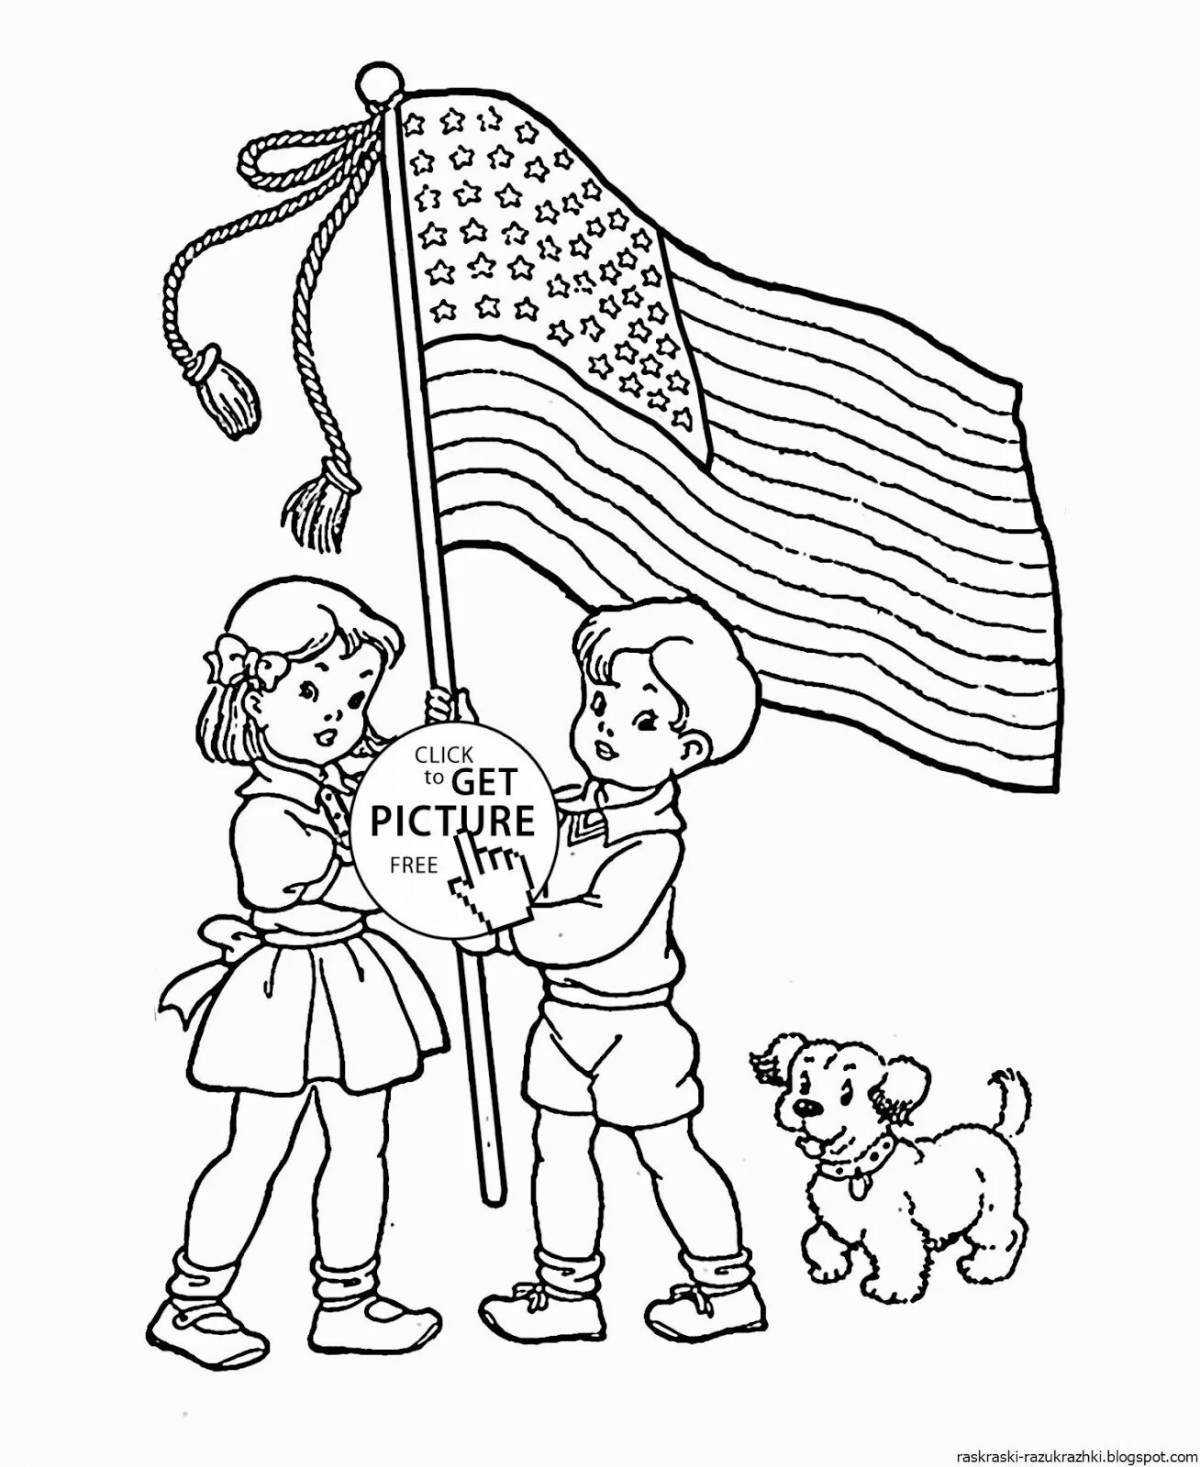 Coloring page joyful day of russia